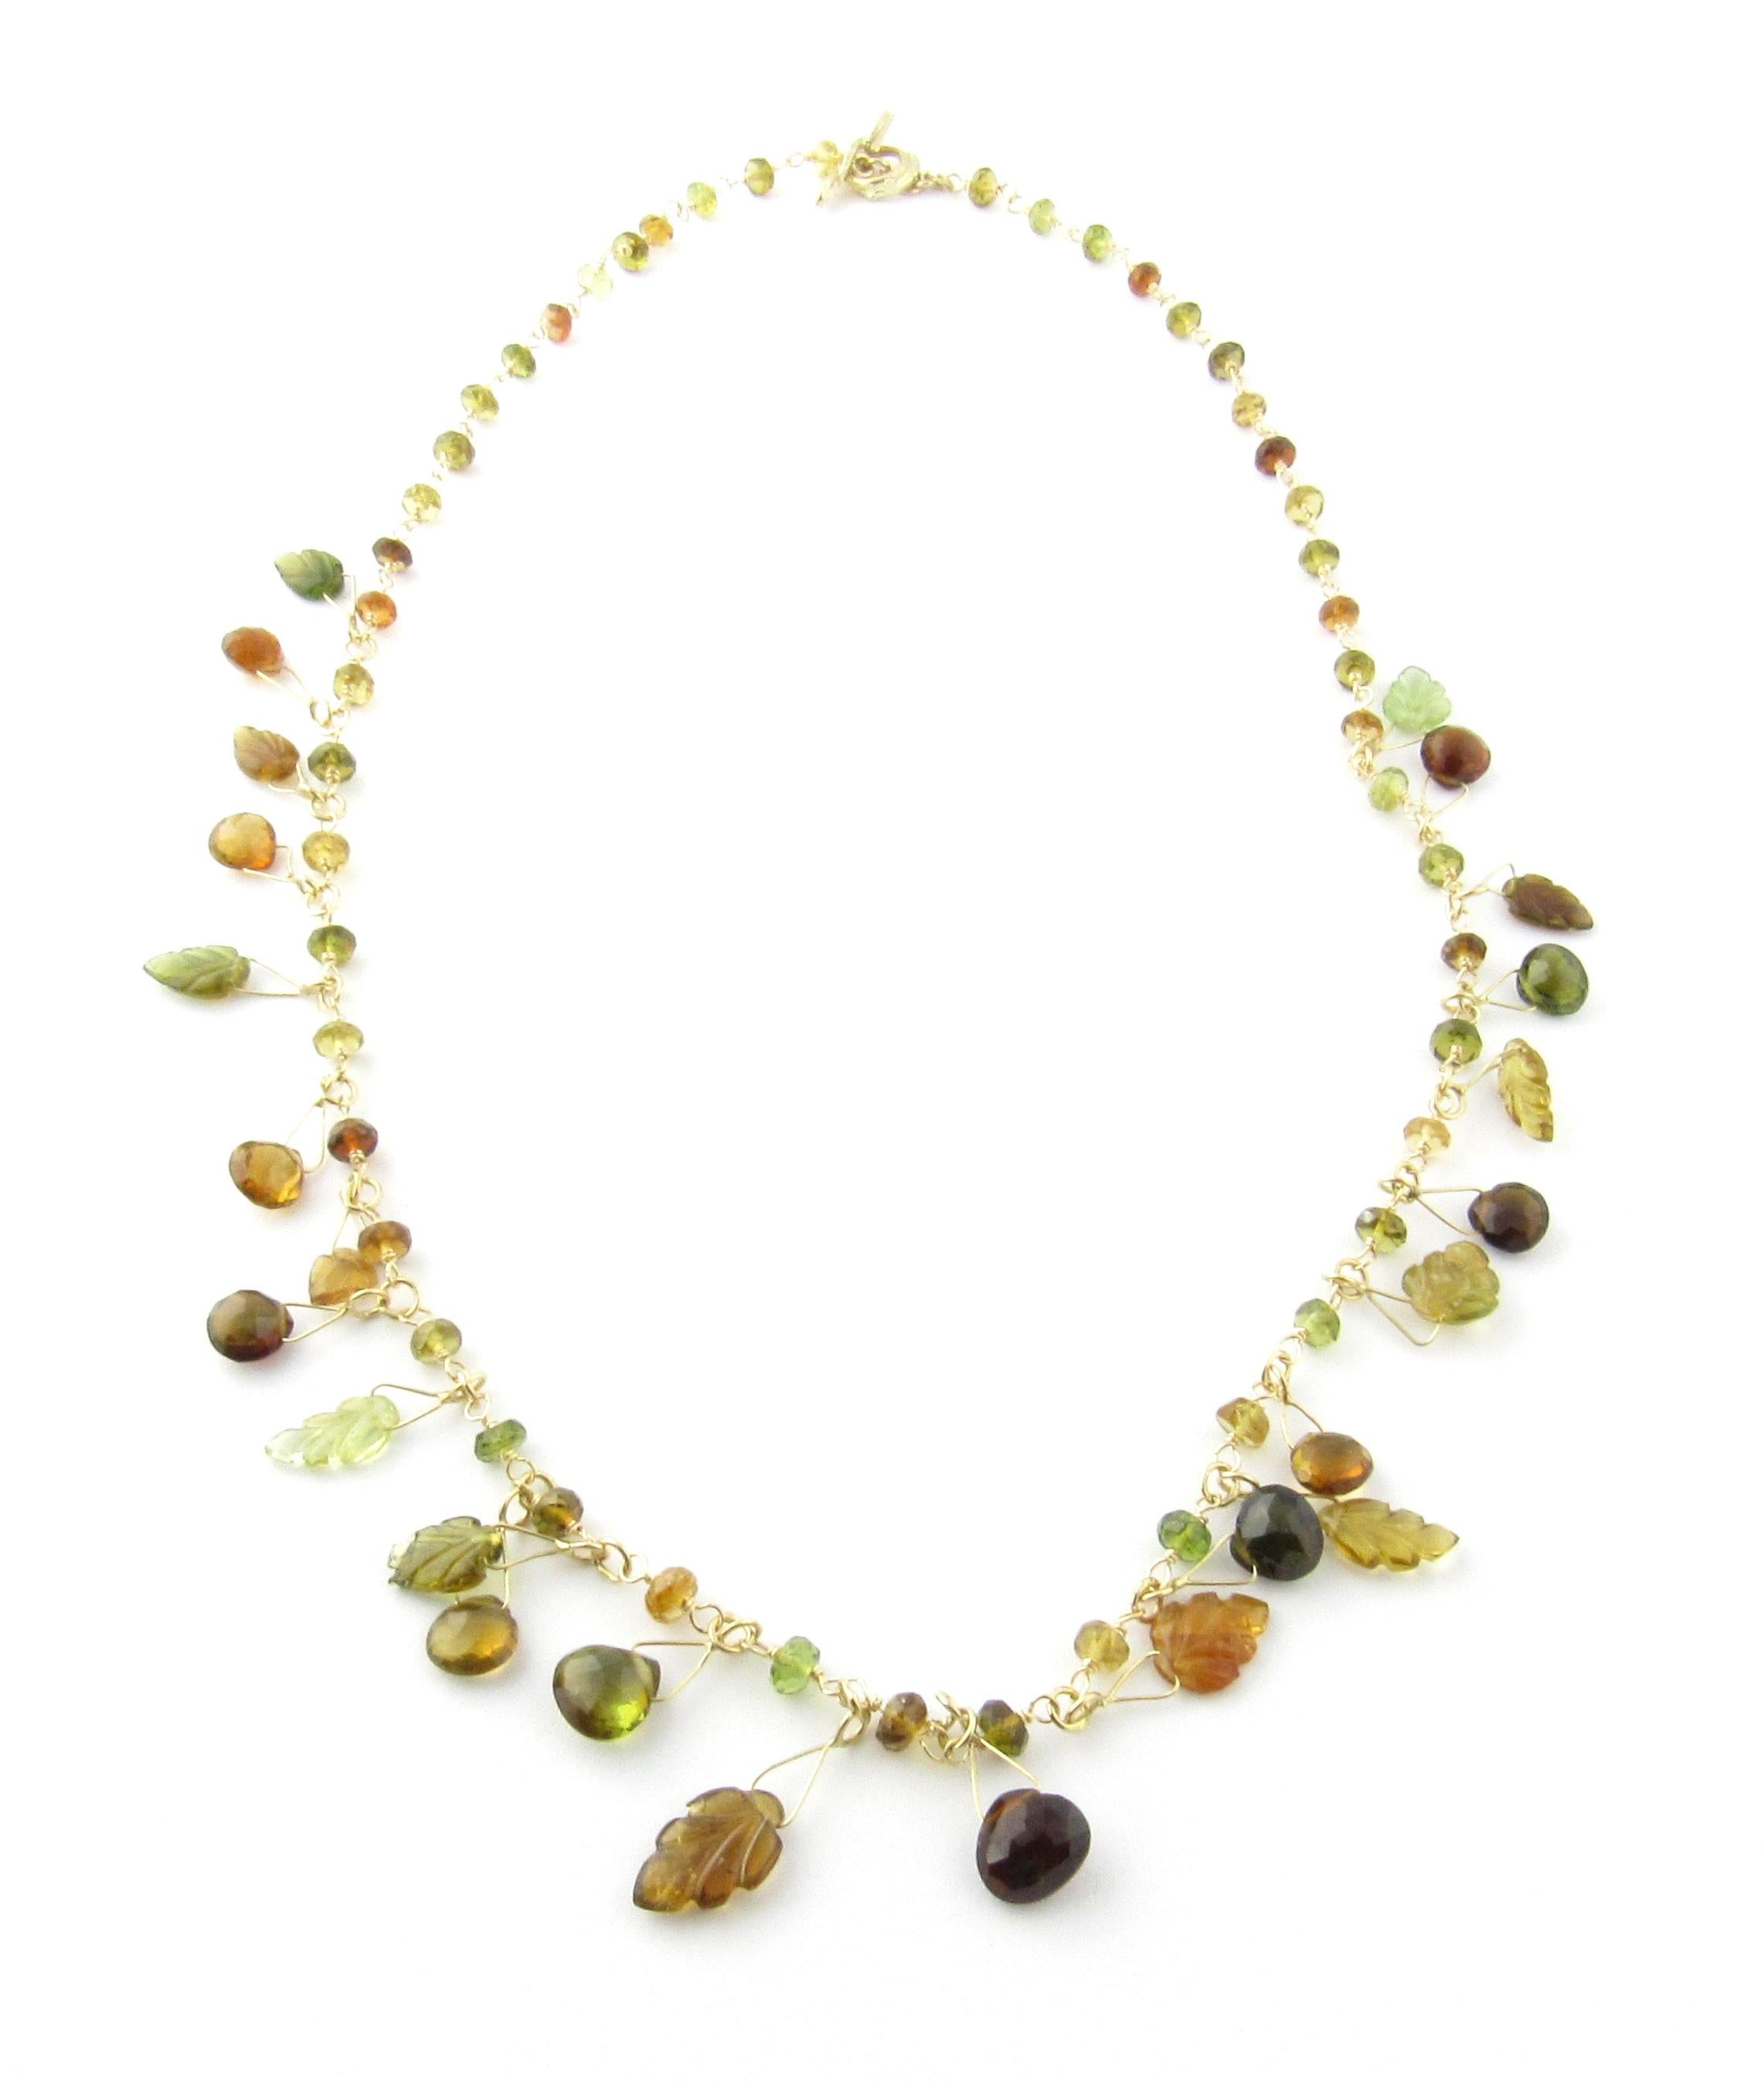 -

This unique necklace features dangling amber stones and glass leaves on a lovely 14K yellow gold necklace with a leaf design toggle closure.

(Note: One leaf bead has superficial chip.)

Size:  16.5 inches

Weight: 3.9 dwt. /  6.2 gr.

Hallmark: